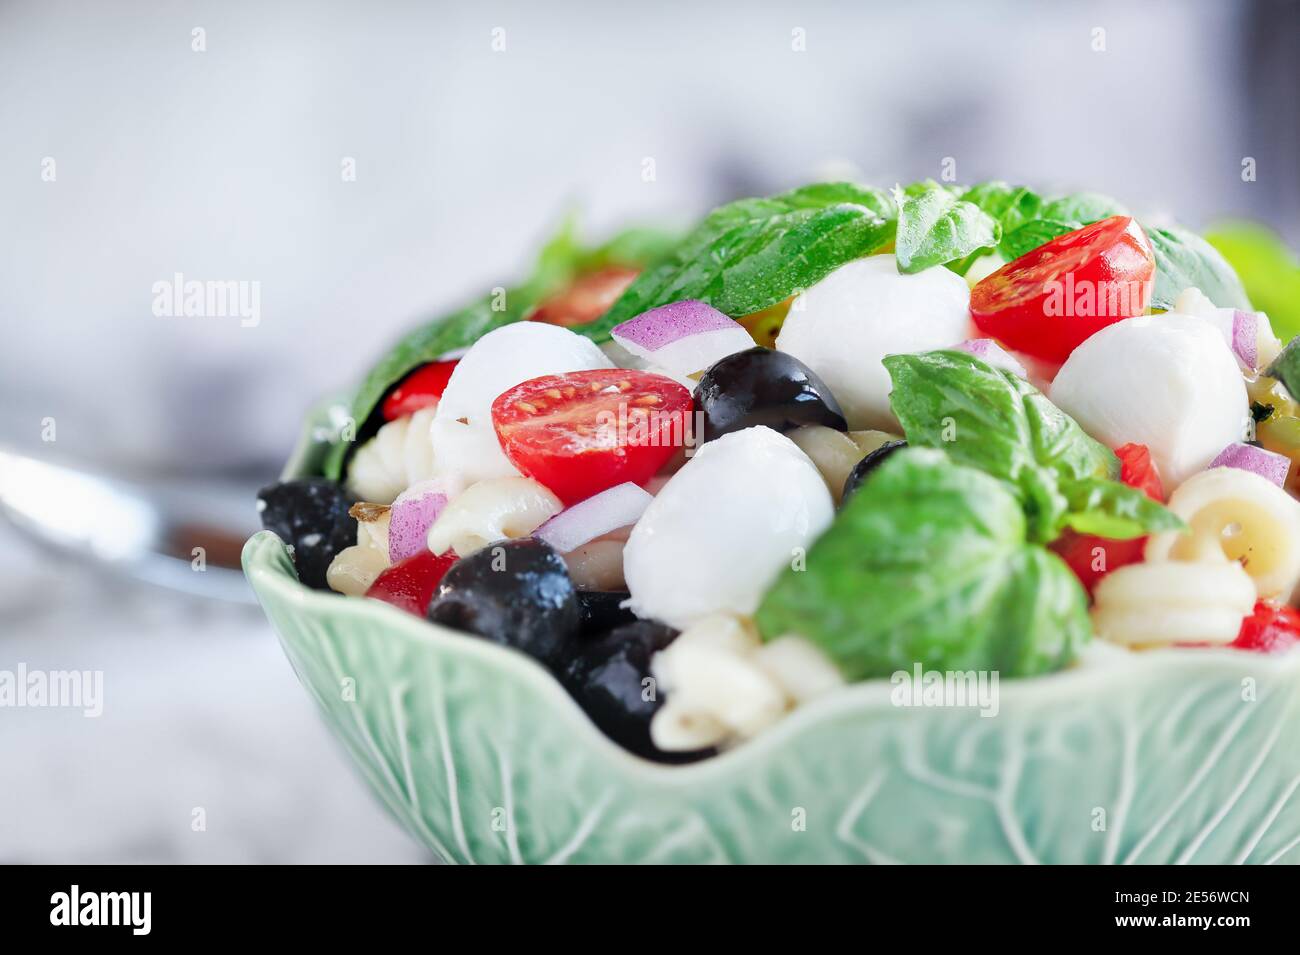 Italian pasta salad with fresh tomatoes, black olives, red onion mozzarella cheese balls, basil, and an olive oil dressing. Extreme selective focus wi Stock Photo